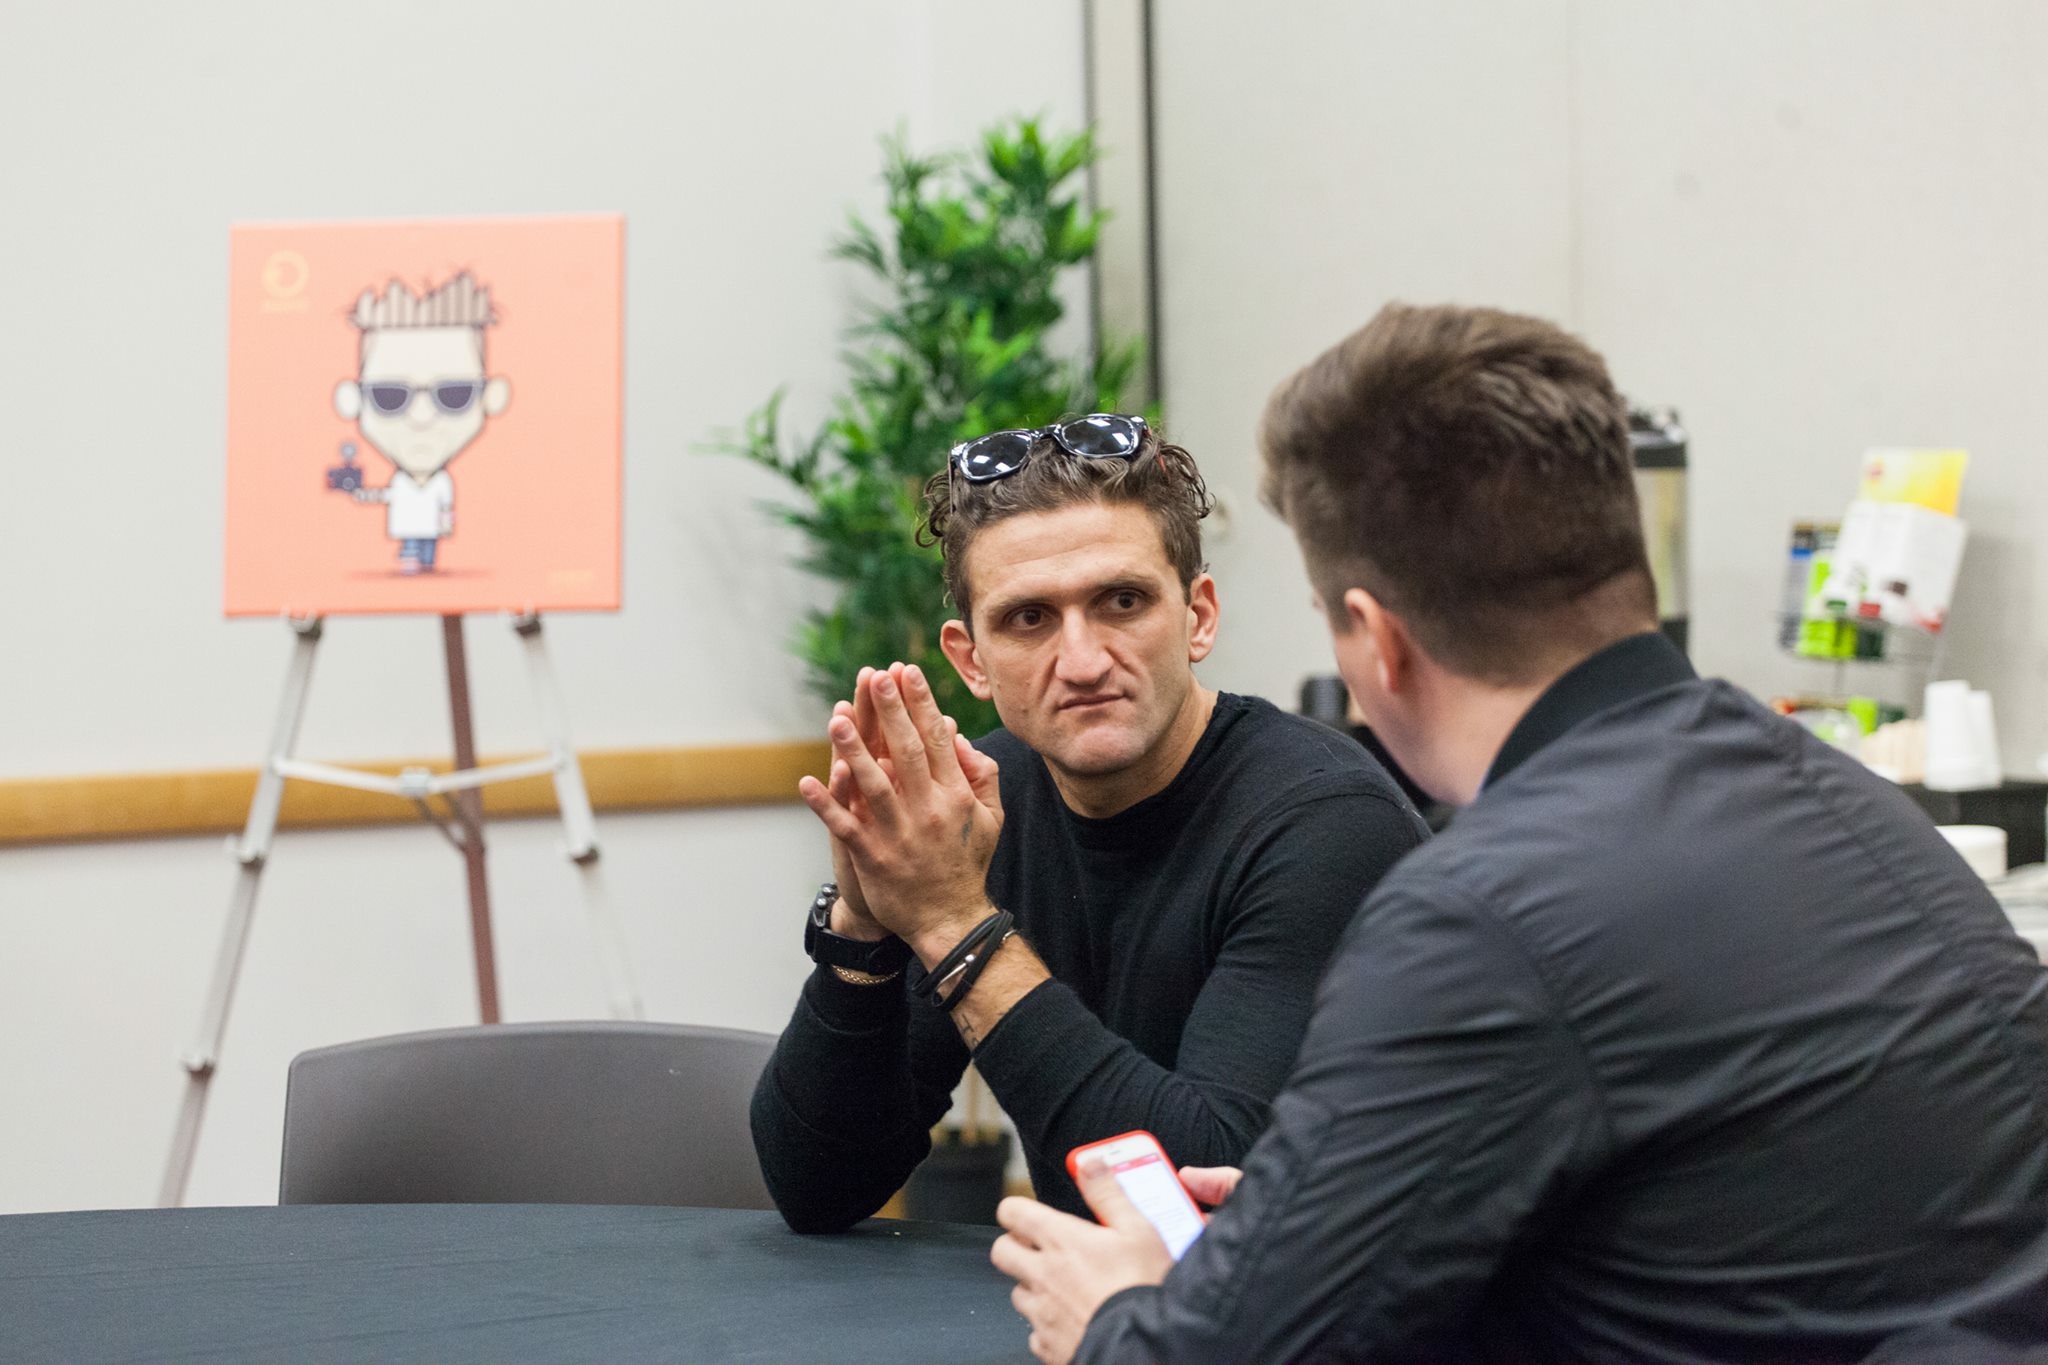 Casey Neistat with his Loogmoji on an easel